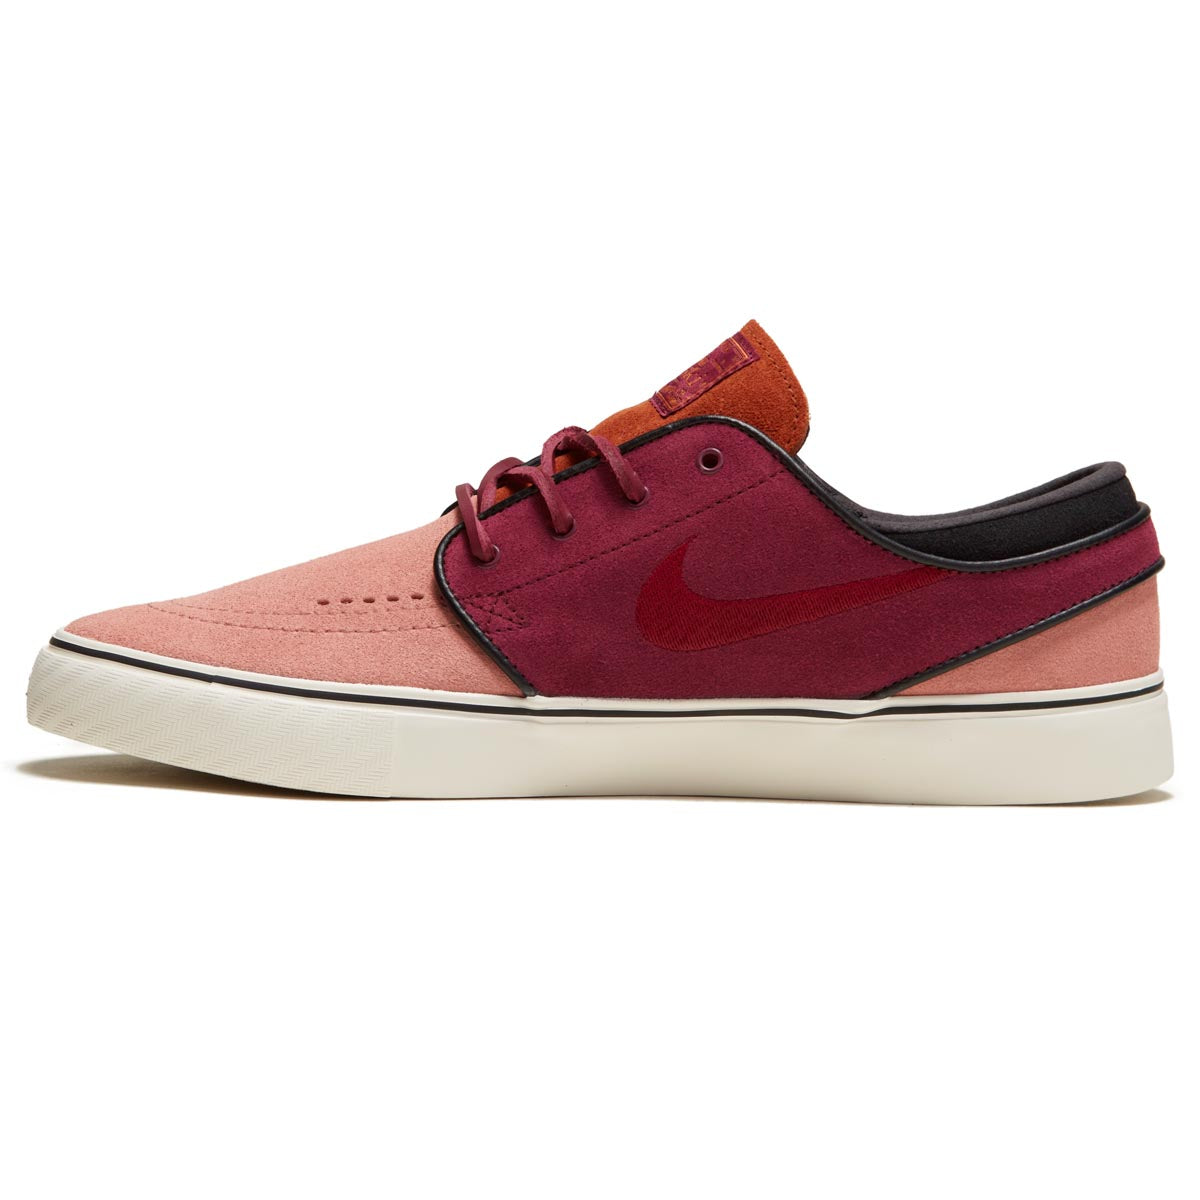 Nike SB Zoom Janoski OG Plus Shoes - Red Stardust/Team Red/Rosewood – CCS